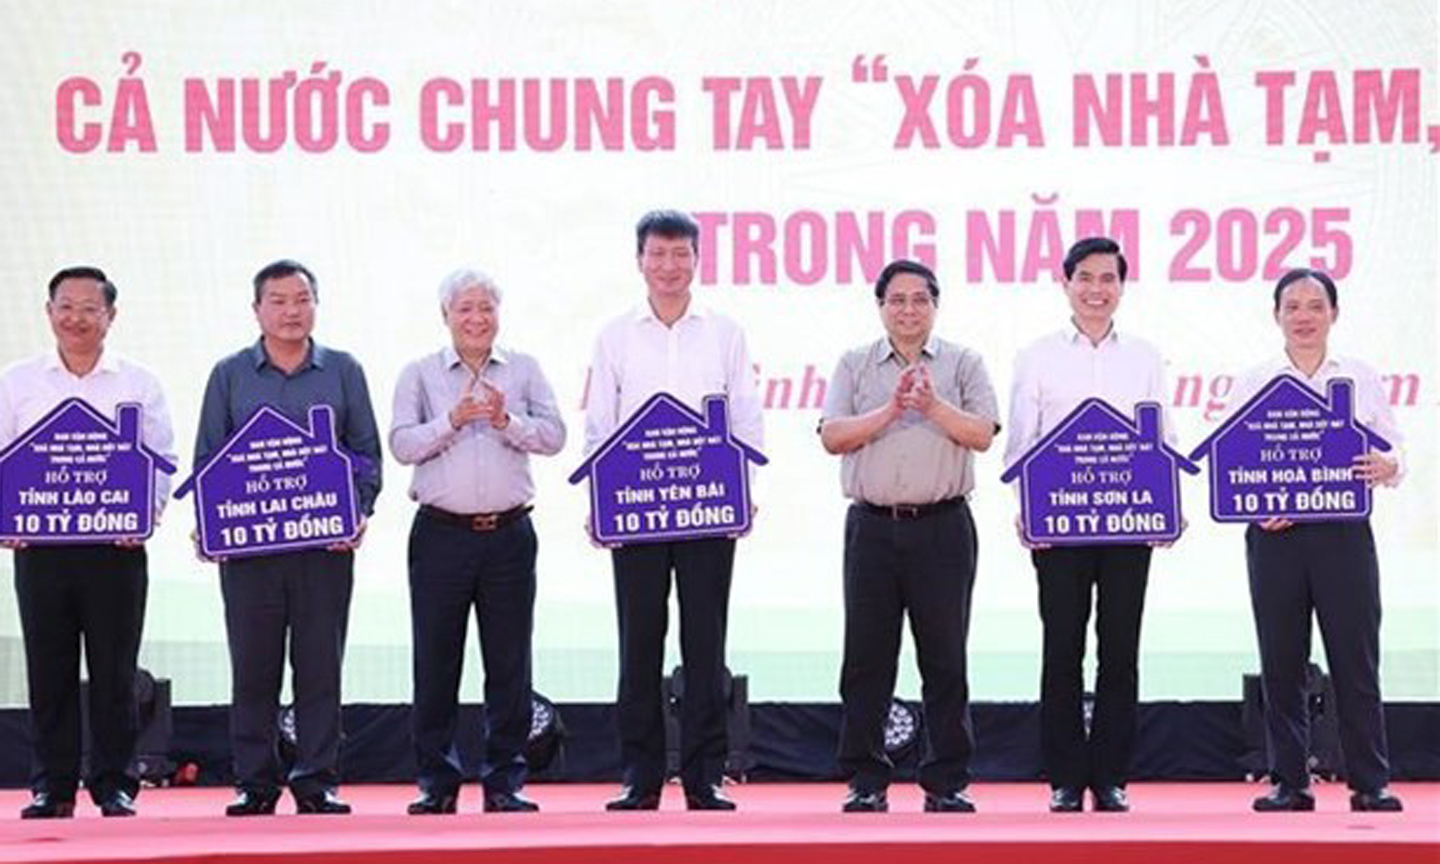 From right: Prime Minister Pham Minh Chinh (3rd) and Chairman of the Vietnam Fatherland Front Central Committee Do Van Chien (5th) hand over the tokens of funds allocated to assist in the removal of temporary and ramshackle houses across several provinces. (Photo: VNA)